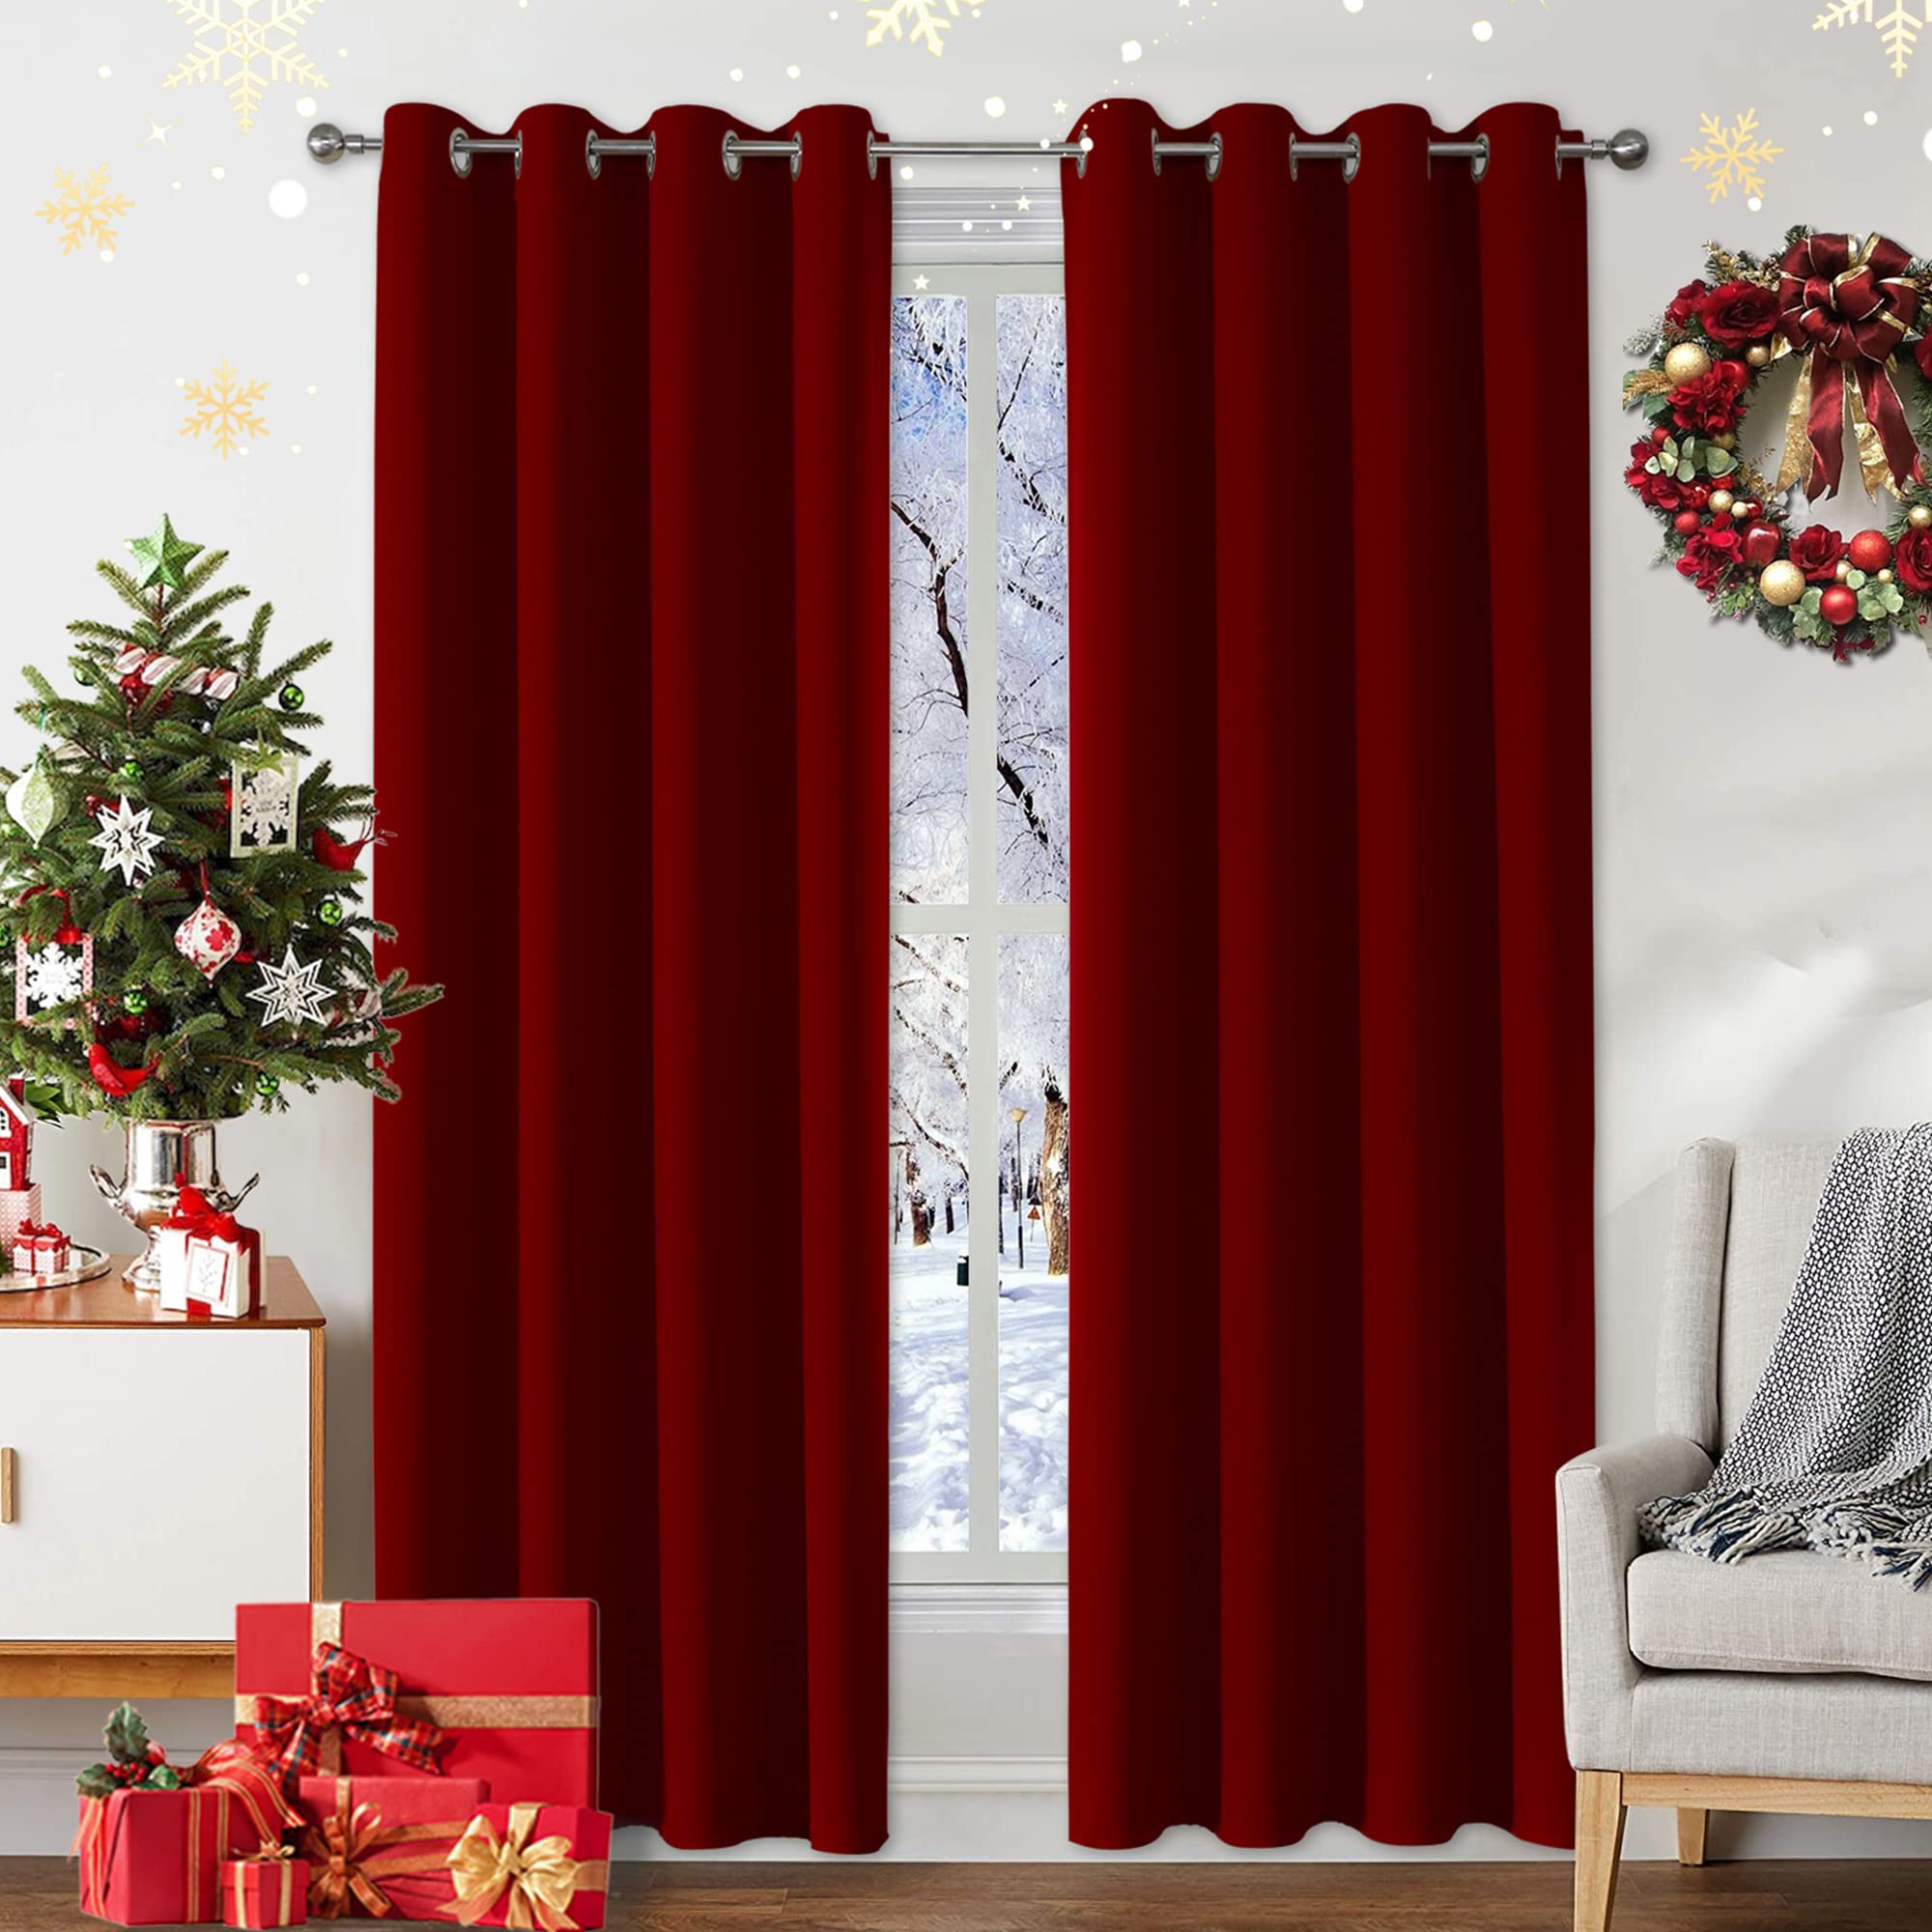 cUcRAF Blackout curtains Thermal Insulated Room Darkening christmas Window Drapes for Bedroom,Light Blocking Drapery for Living 